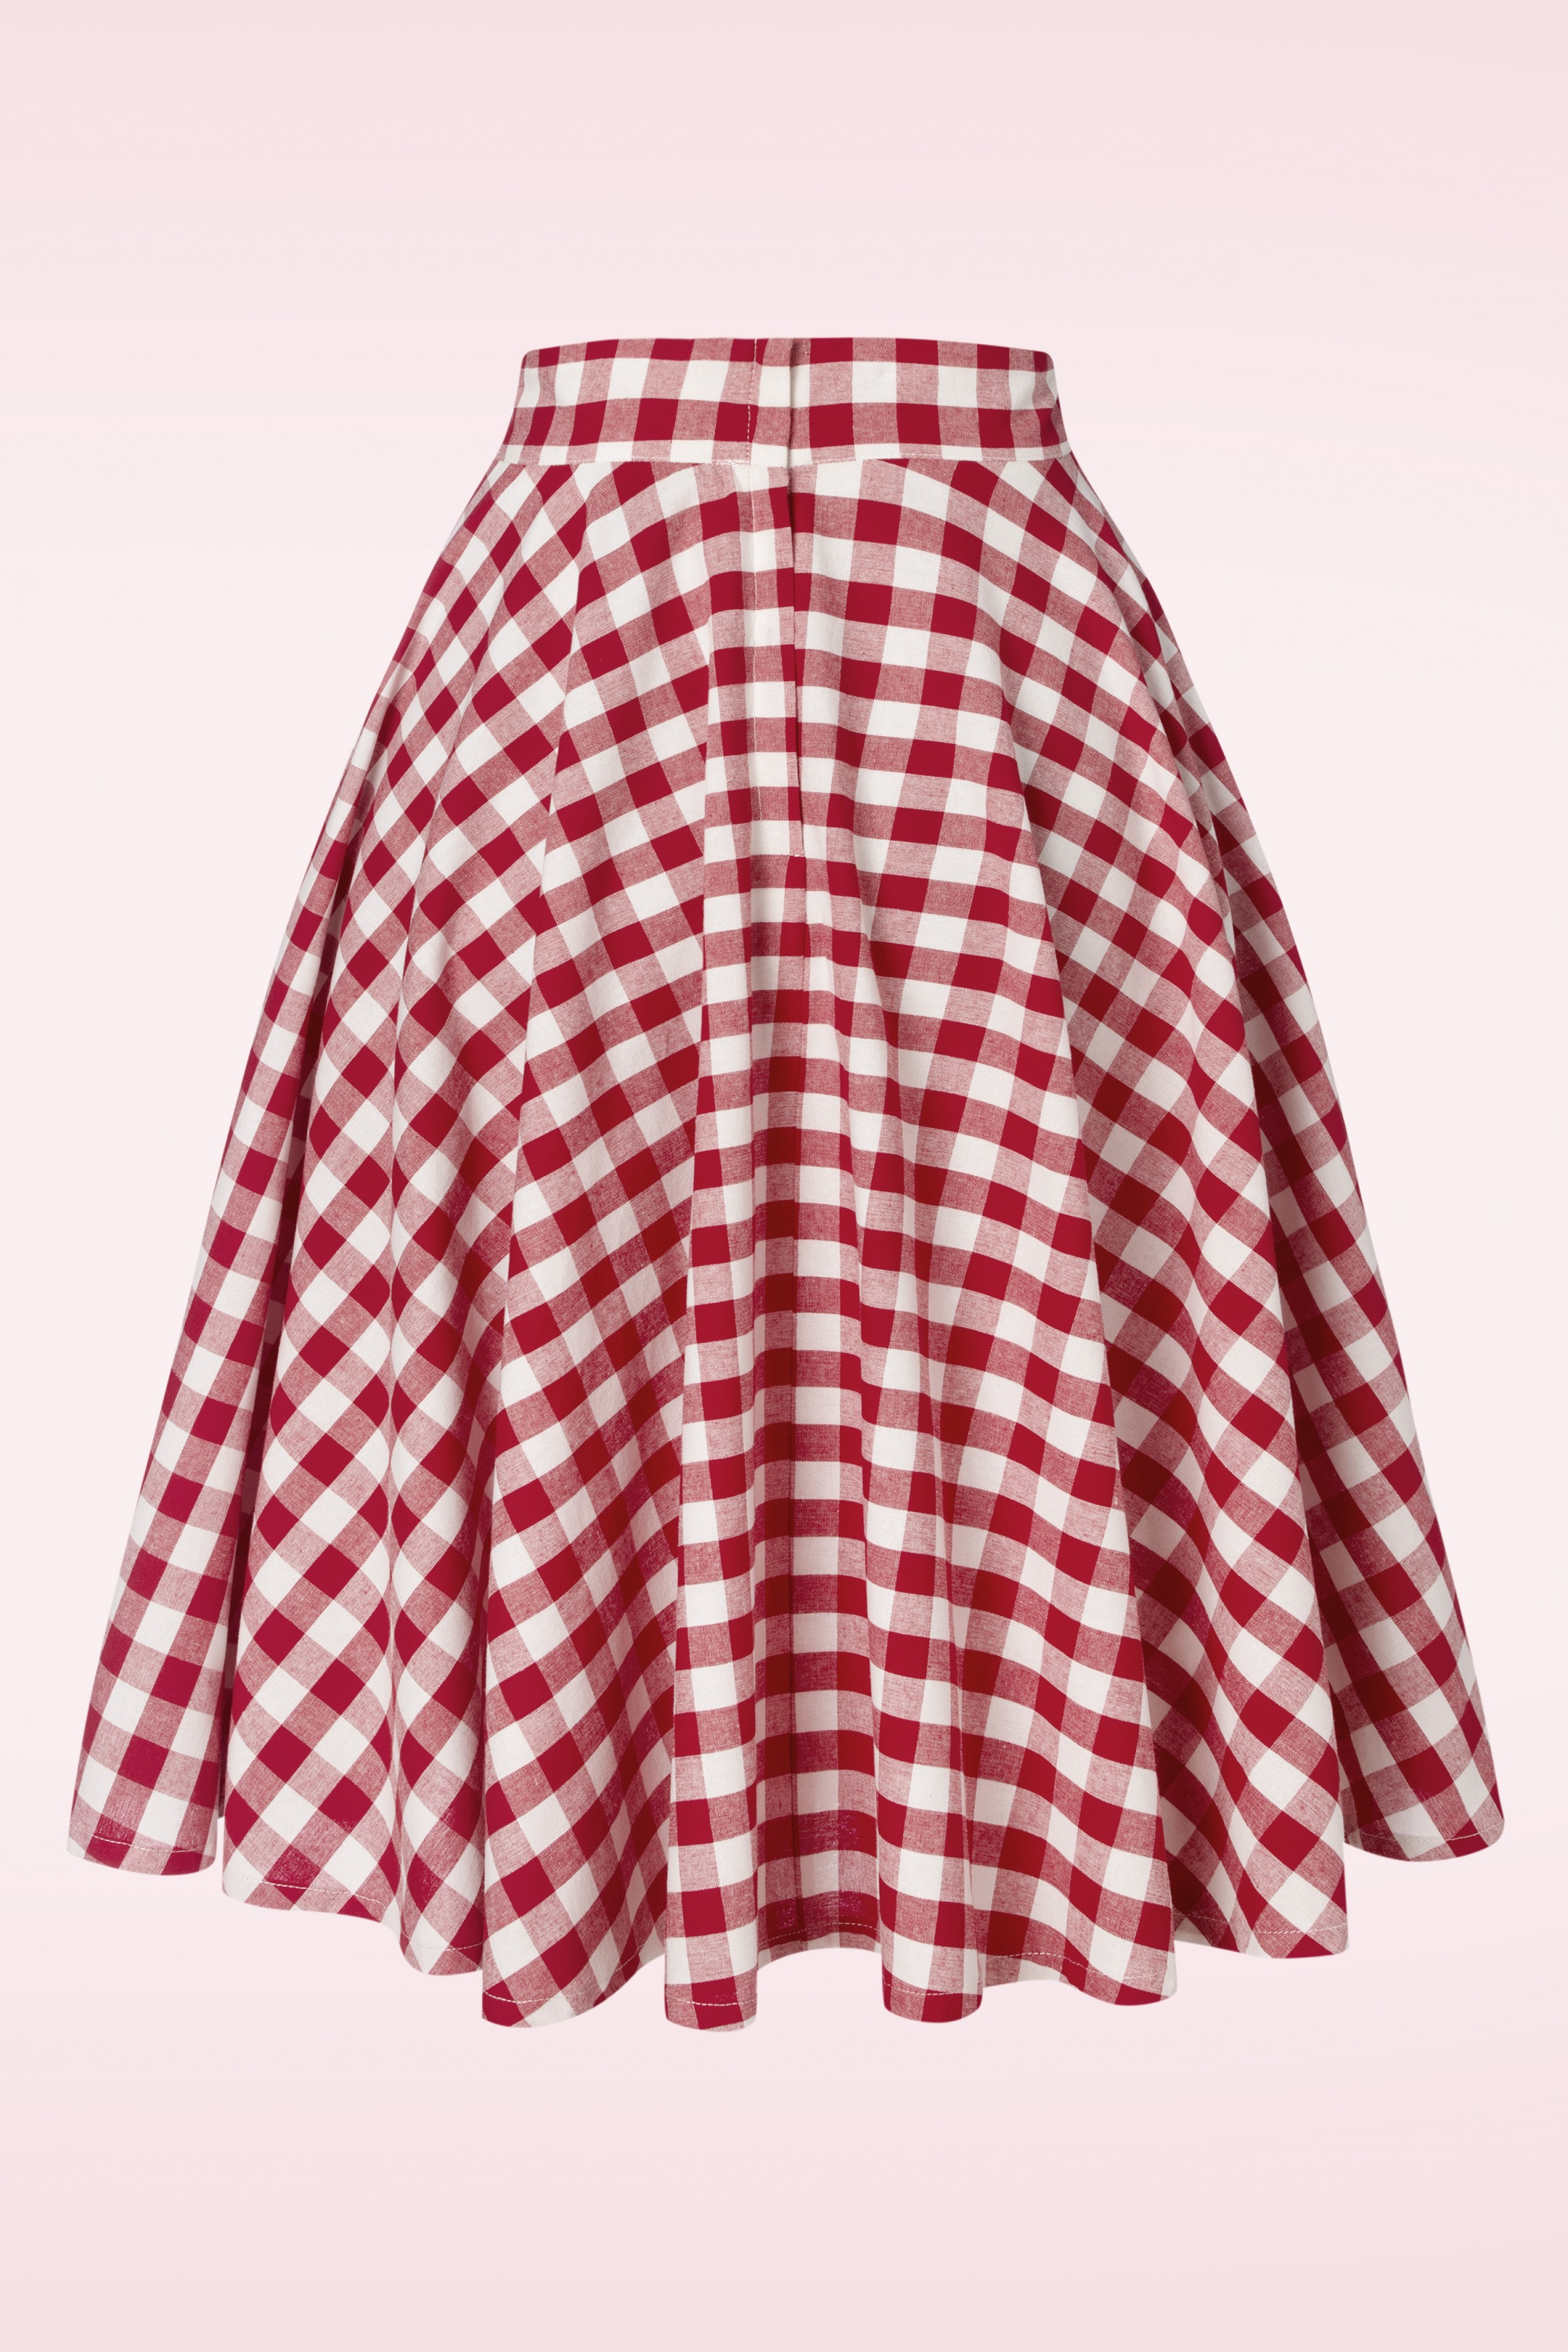 Banned Retro - Row Boat Date Check Swing rok in rood 3